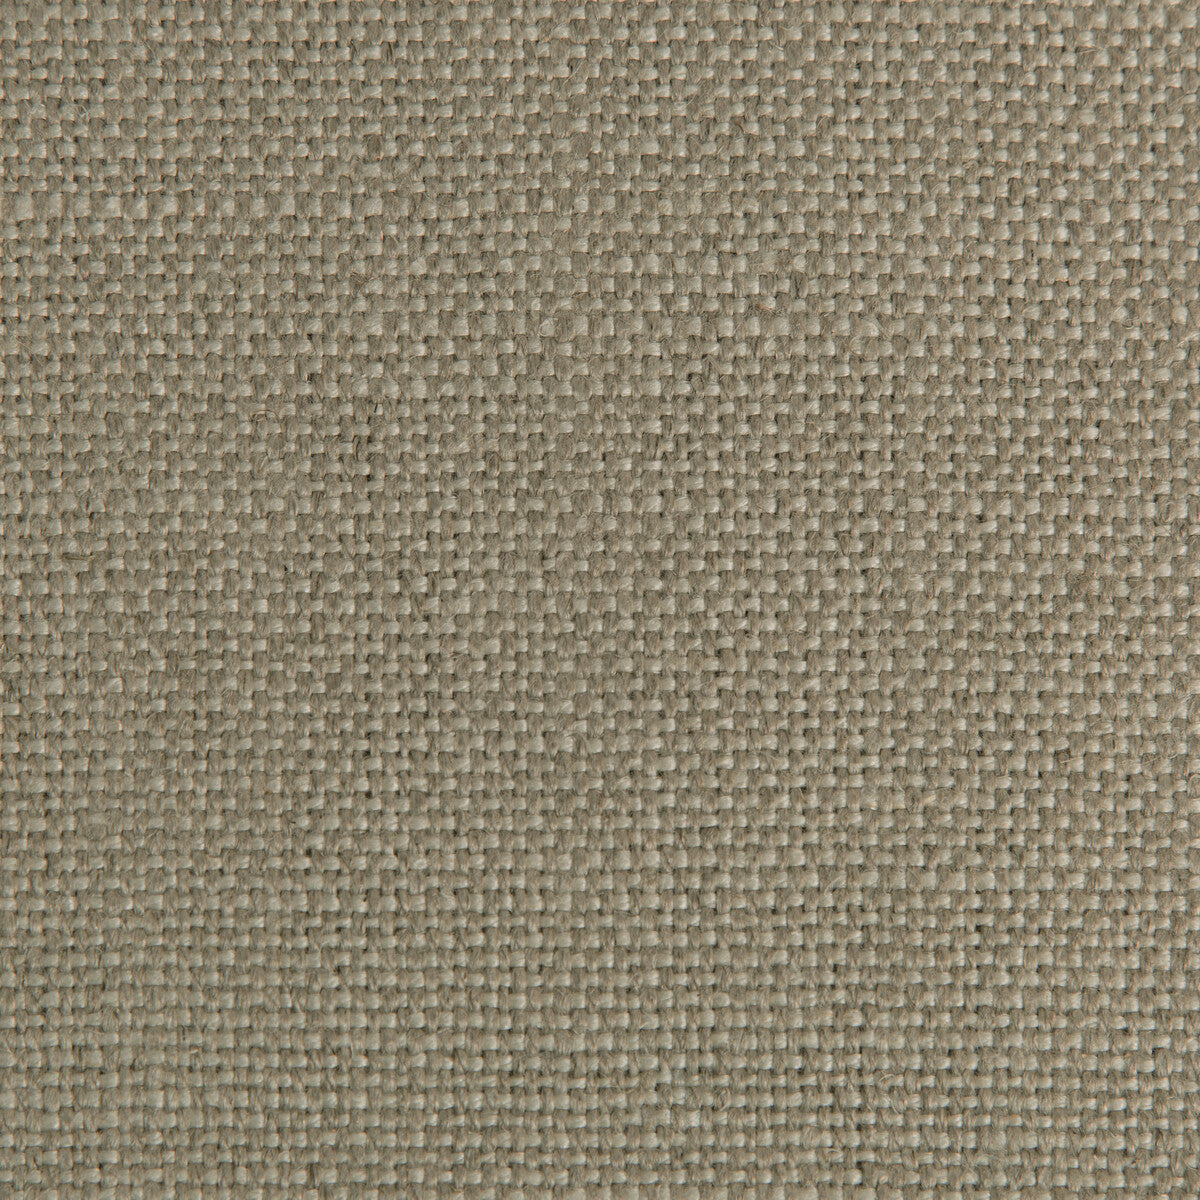 Hampton Linen fabric in flax color - pattern 2012171.1616.0 - by Lee Jofa in the Colour Complements II collection